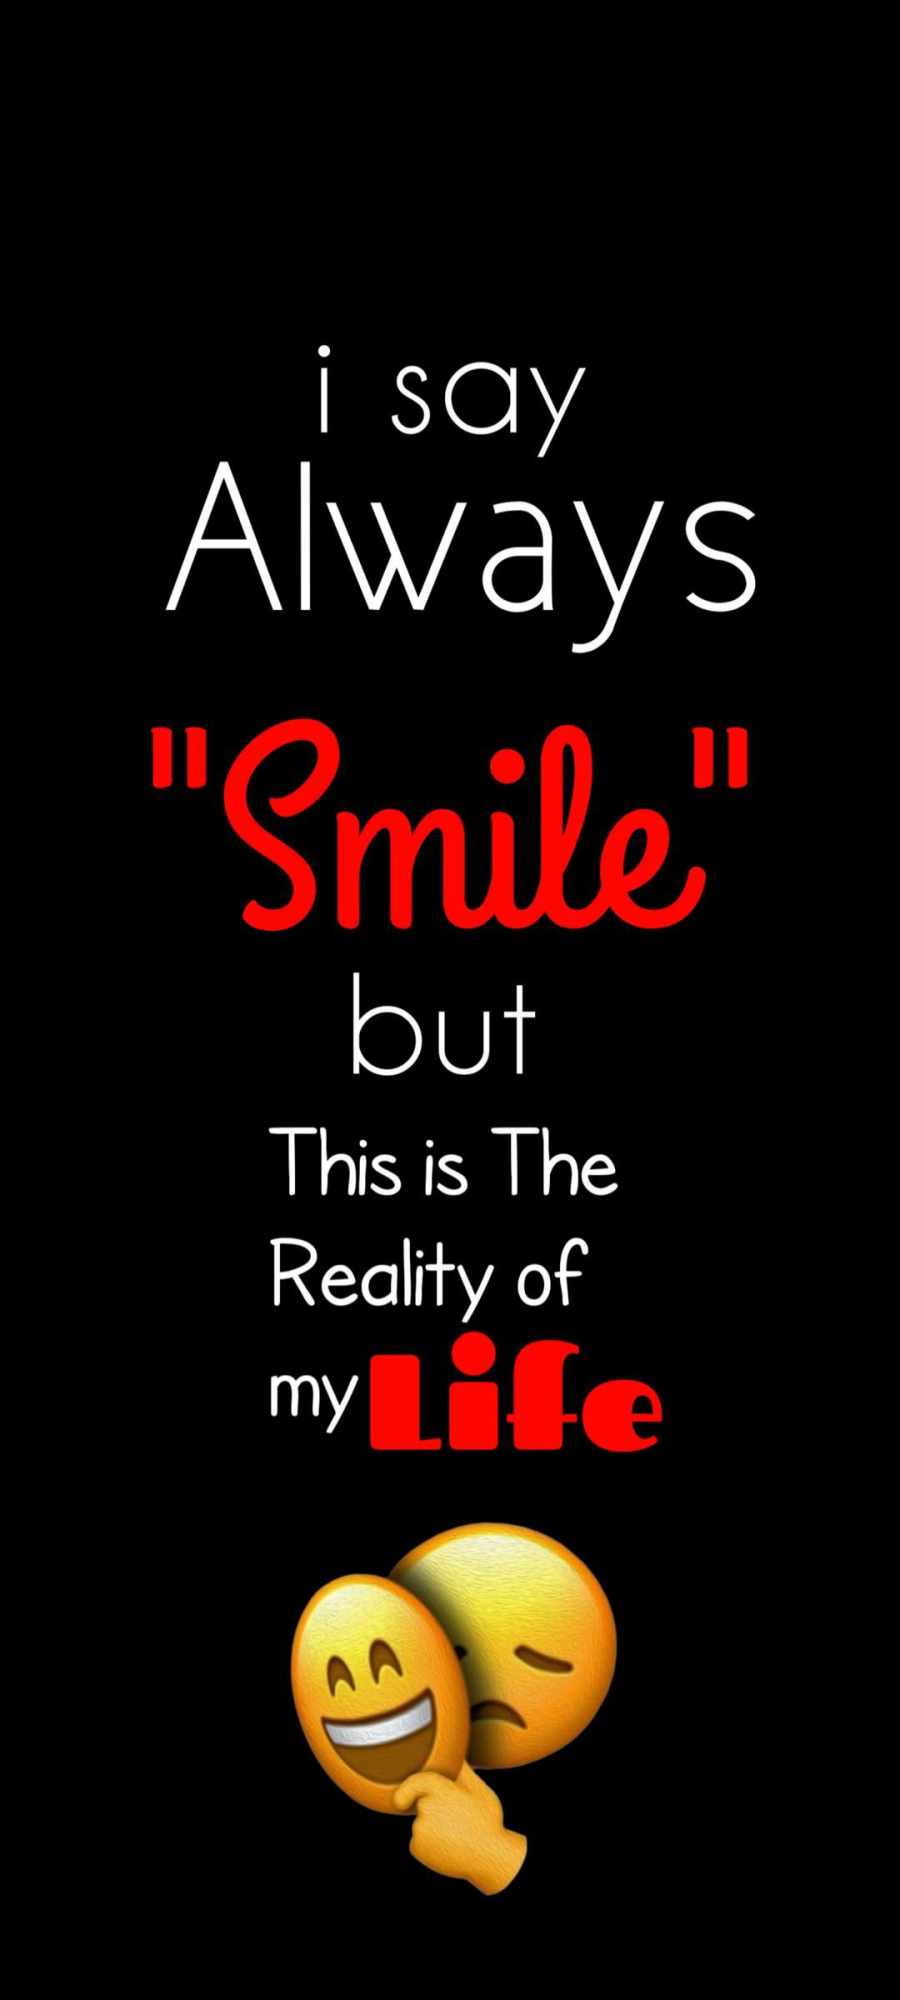 Reality of My Life iPhone Wallpaper